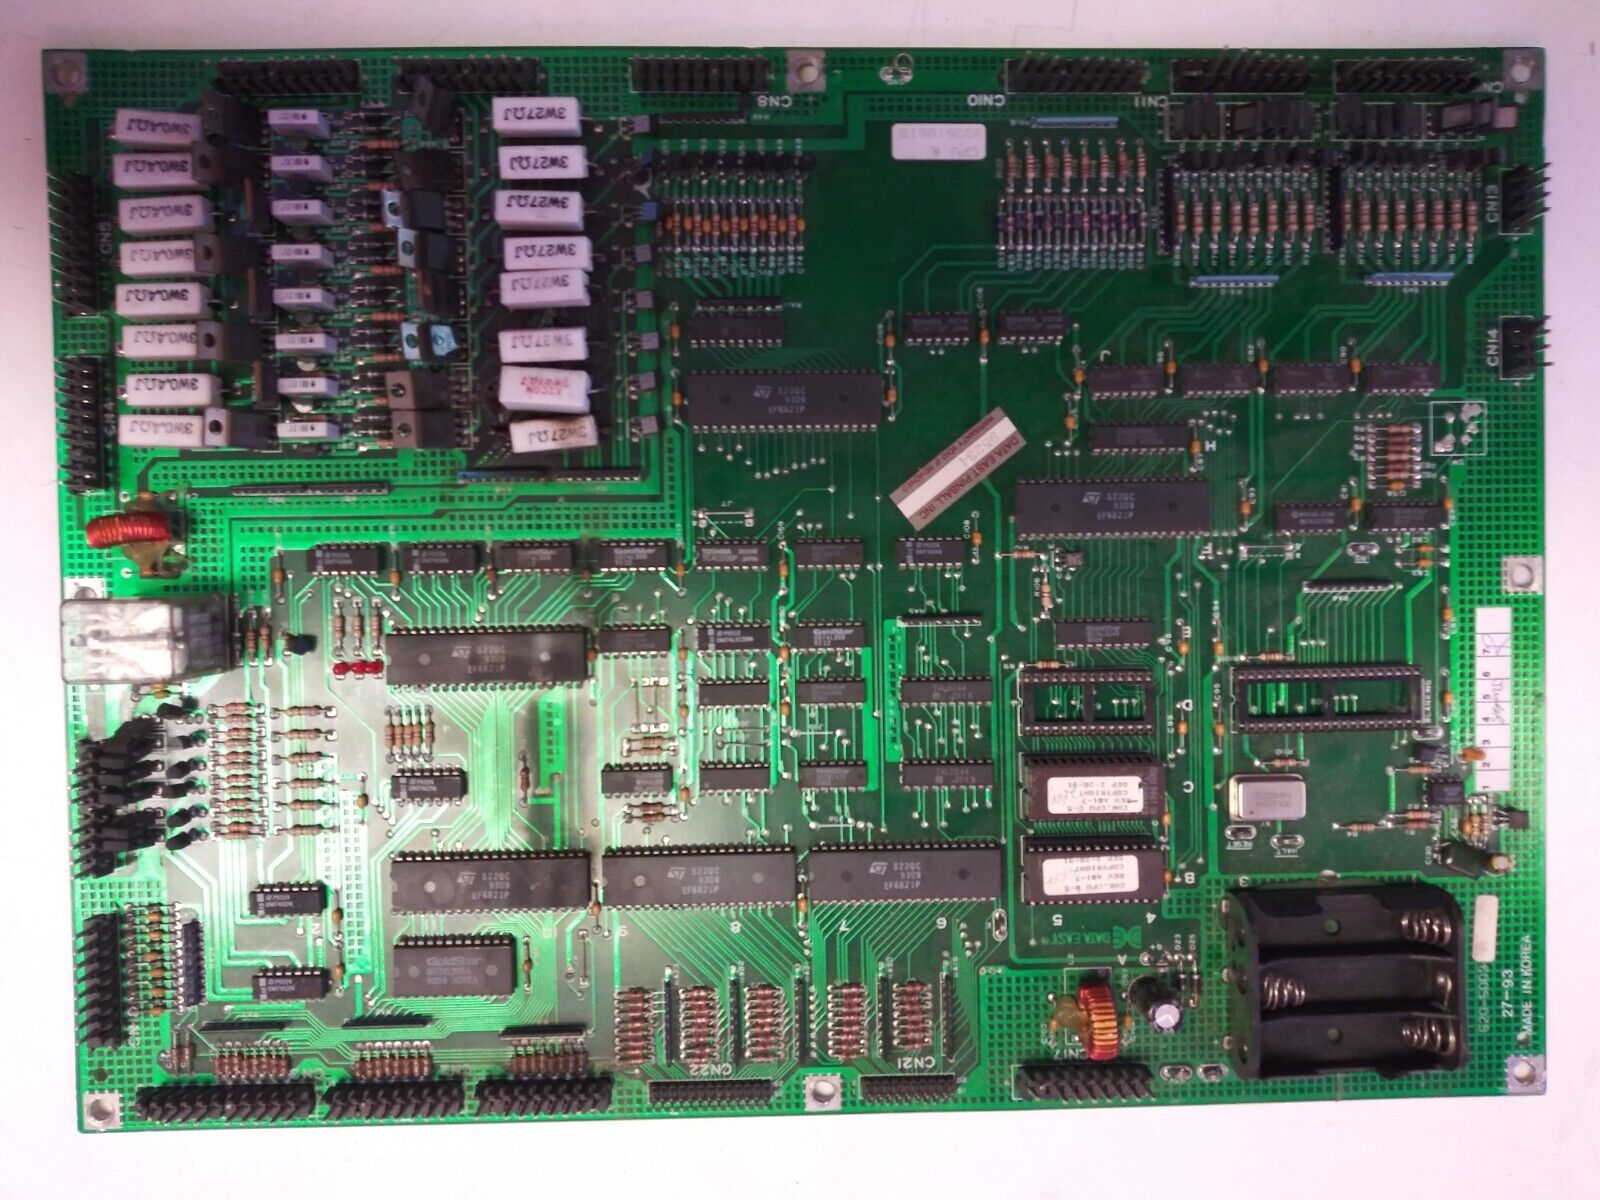 Data East 27-93 520-5003 Pinball motherboard CPU - Checkpoint?